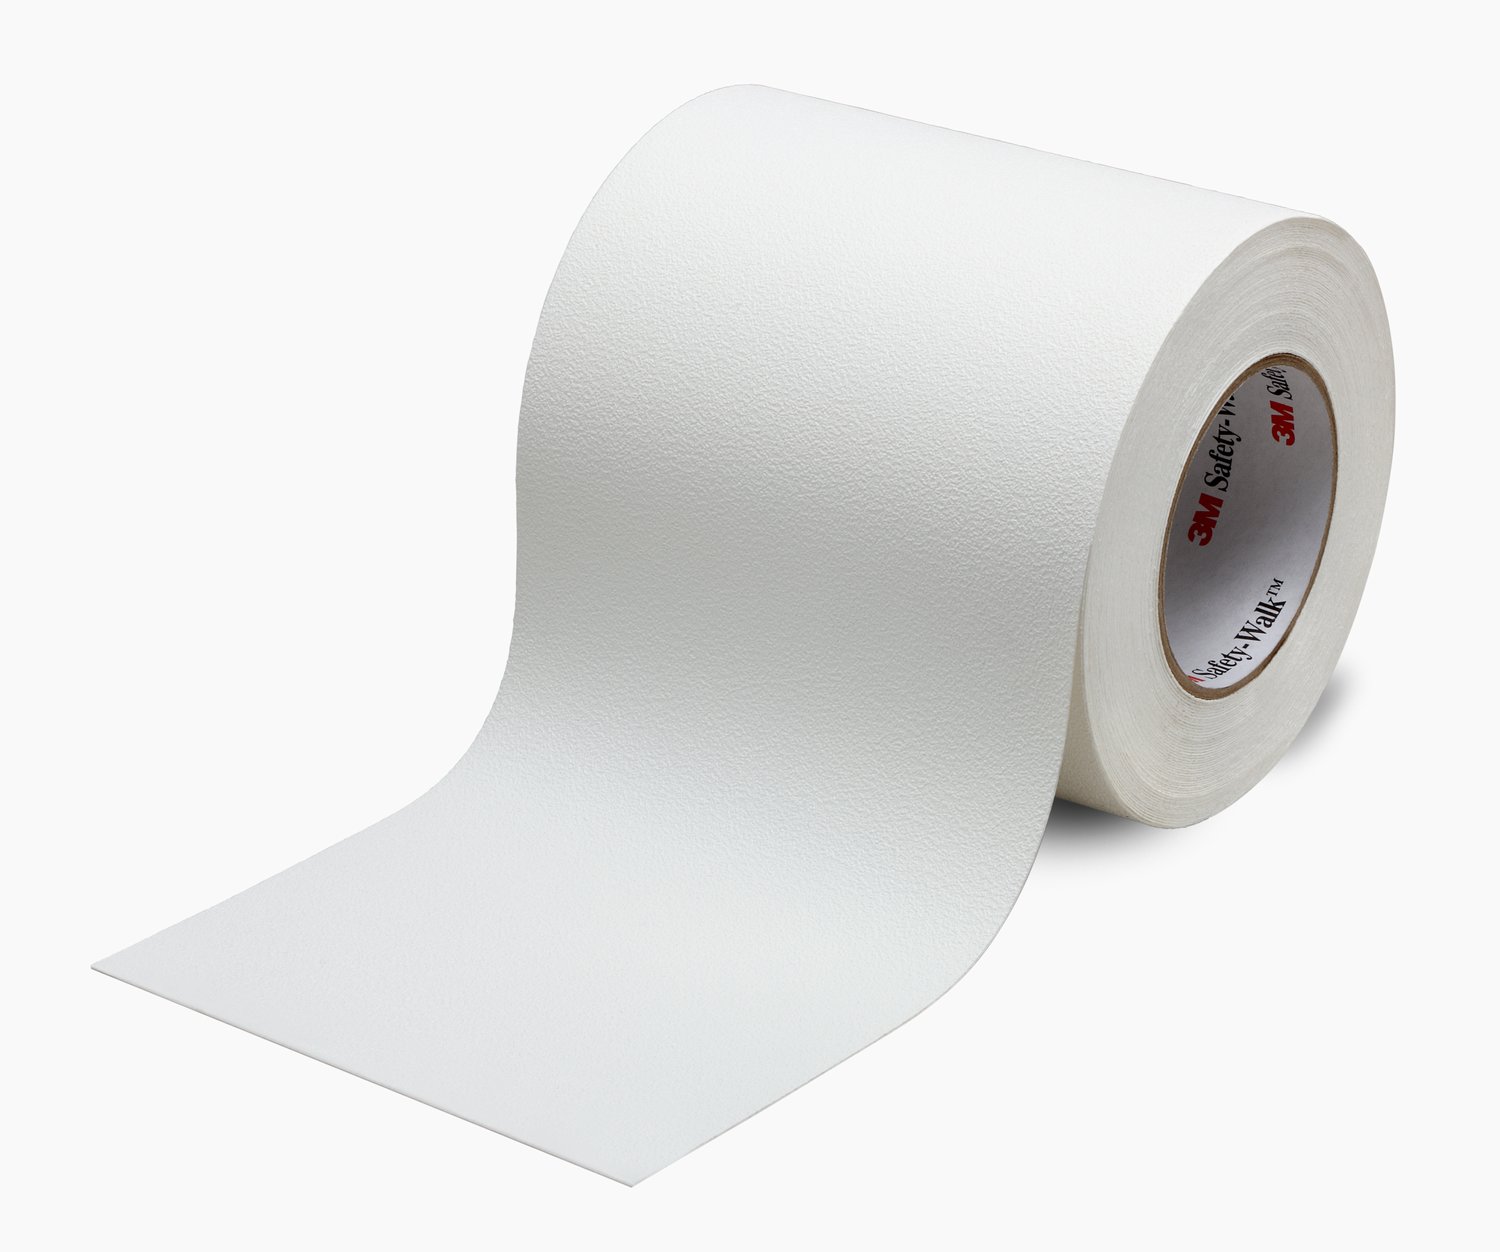 7000029633 - 3M Safety-Walk Slip-Resistant Fine Resilient Tapes & Treads 280,
White, 6 in x 60 ft, 1 Rolls/Case